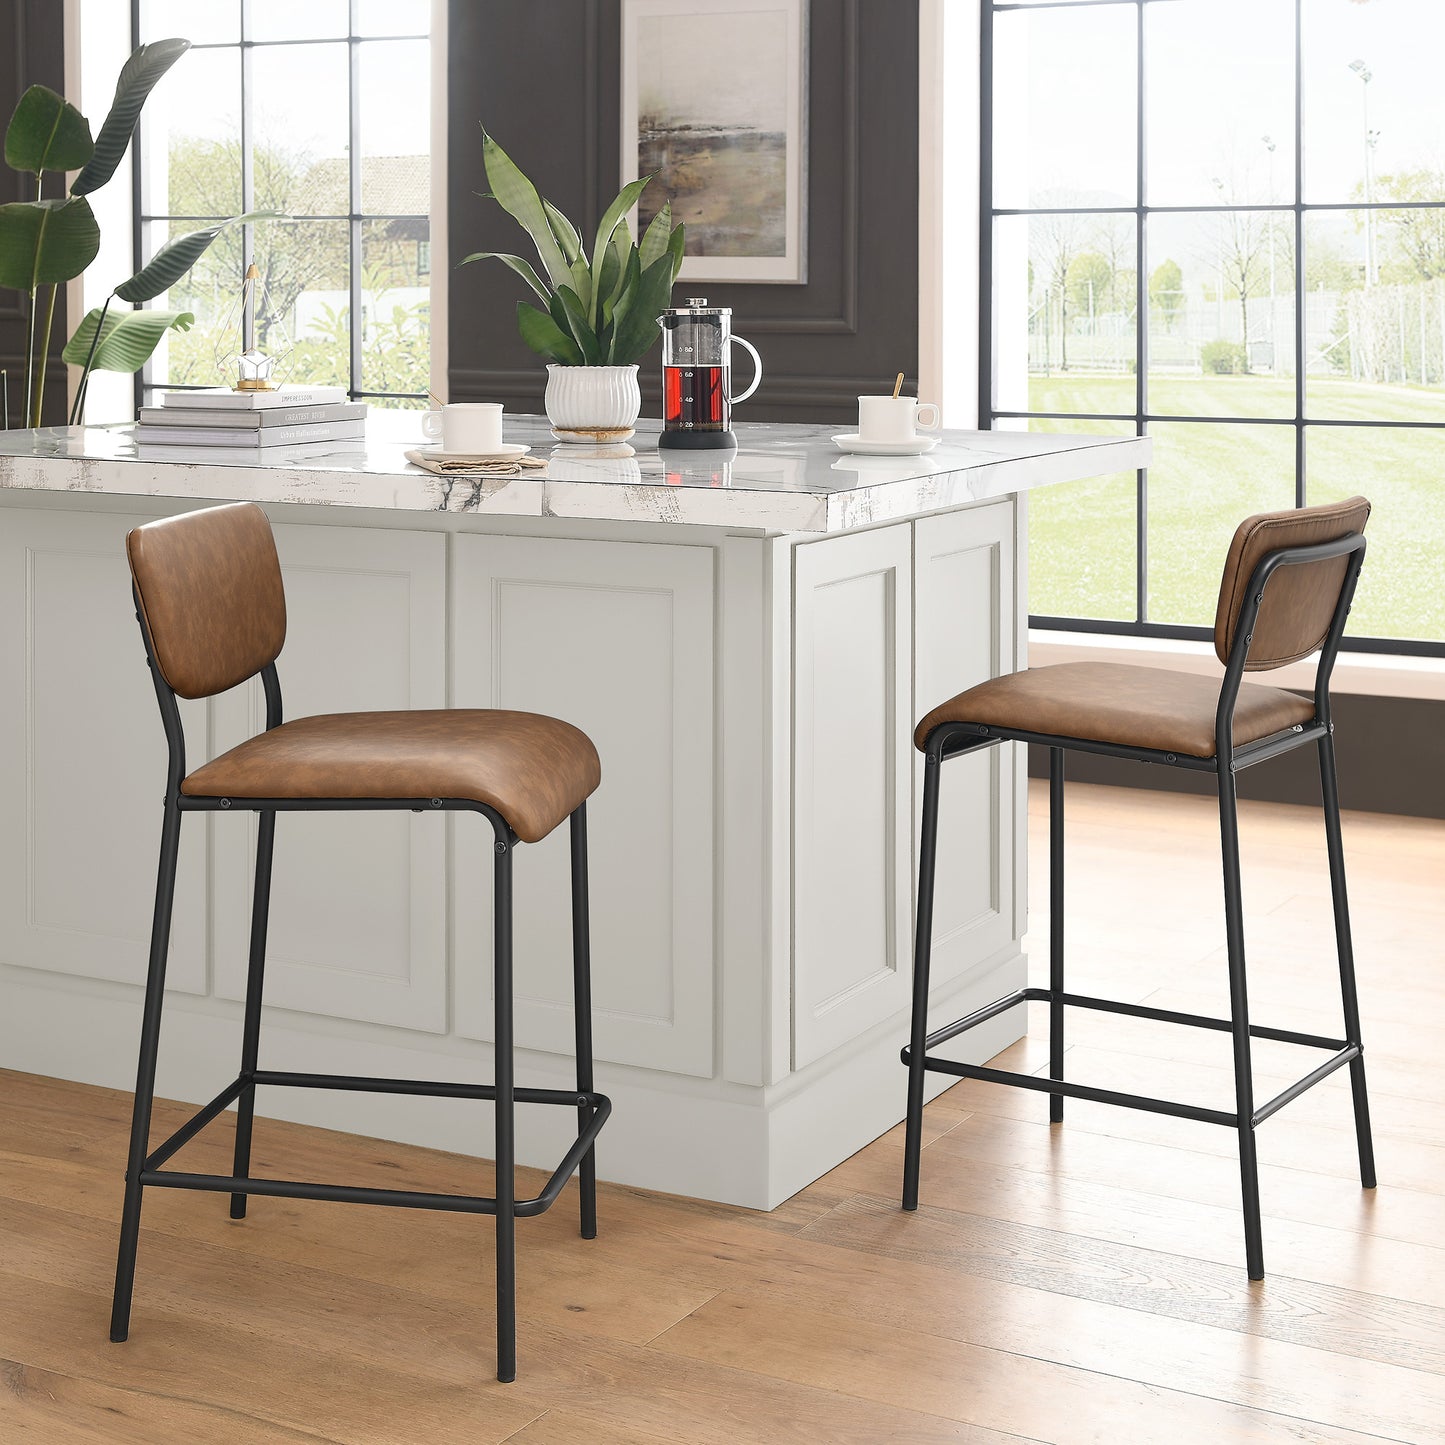 Pu Faux Leather Counter Stools Set of 2, Pub Counter Stool with Back and Footrest, Brown (17.5"x19.25“x34.5”）